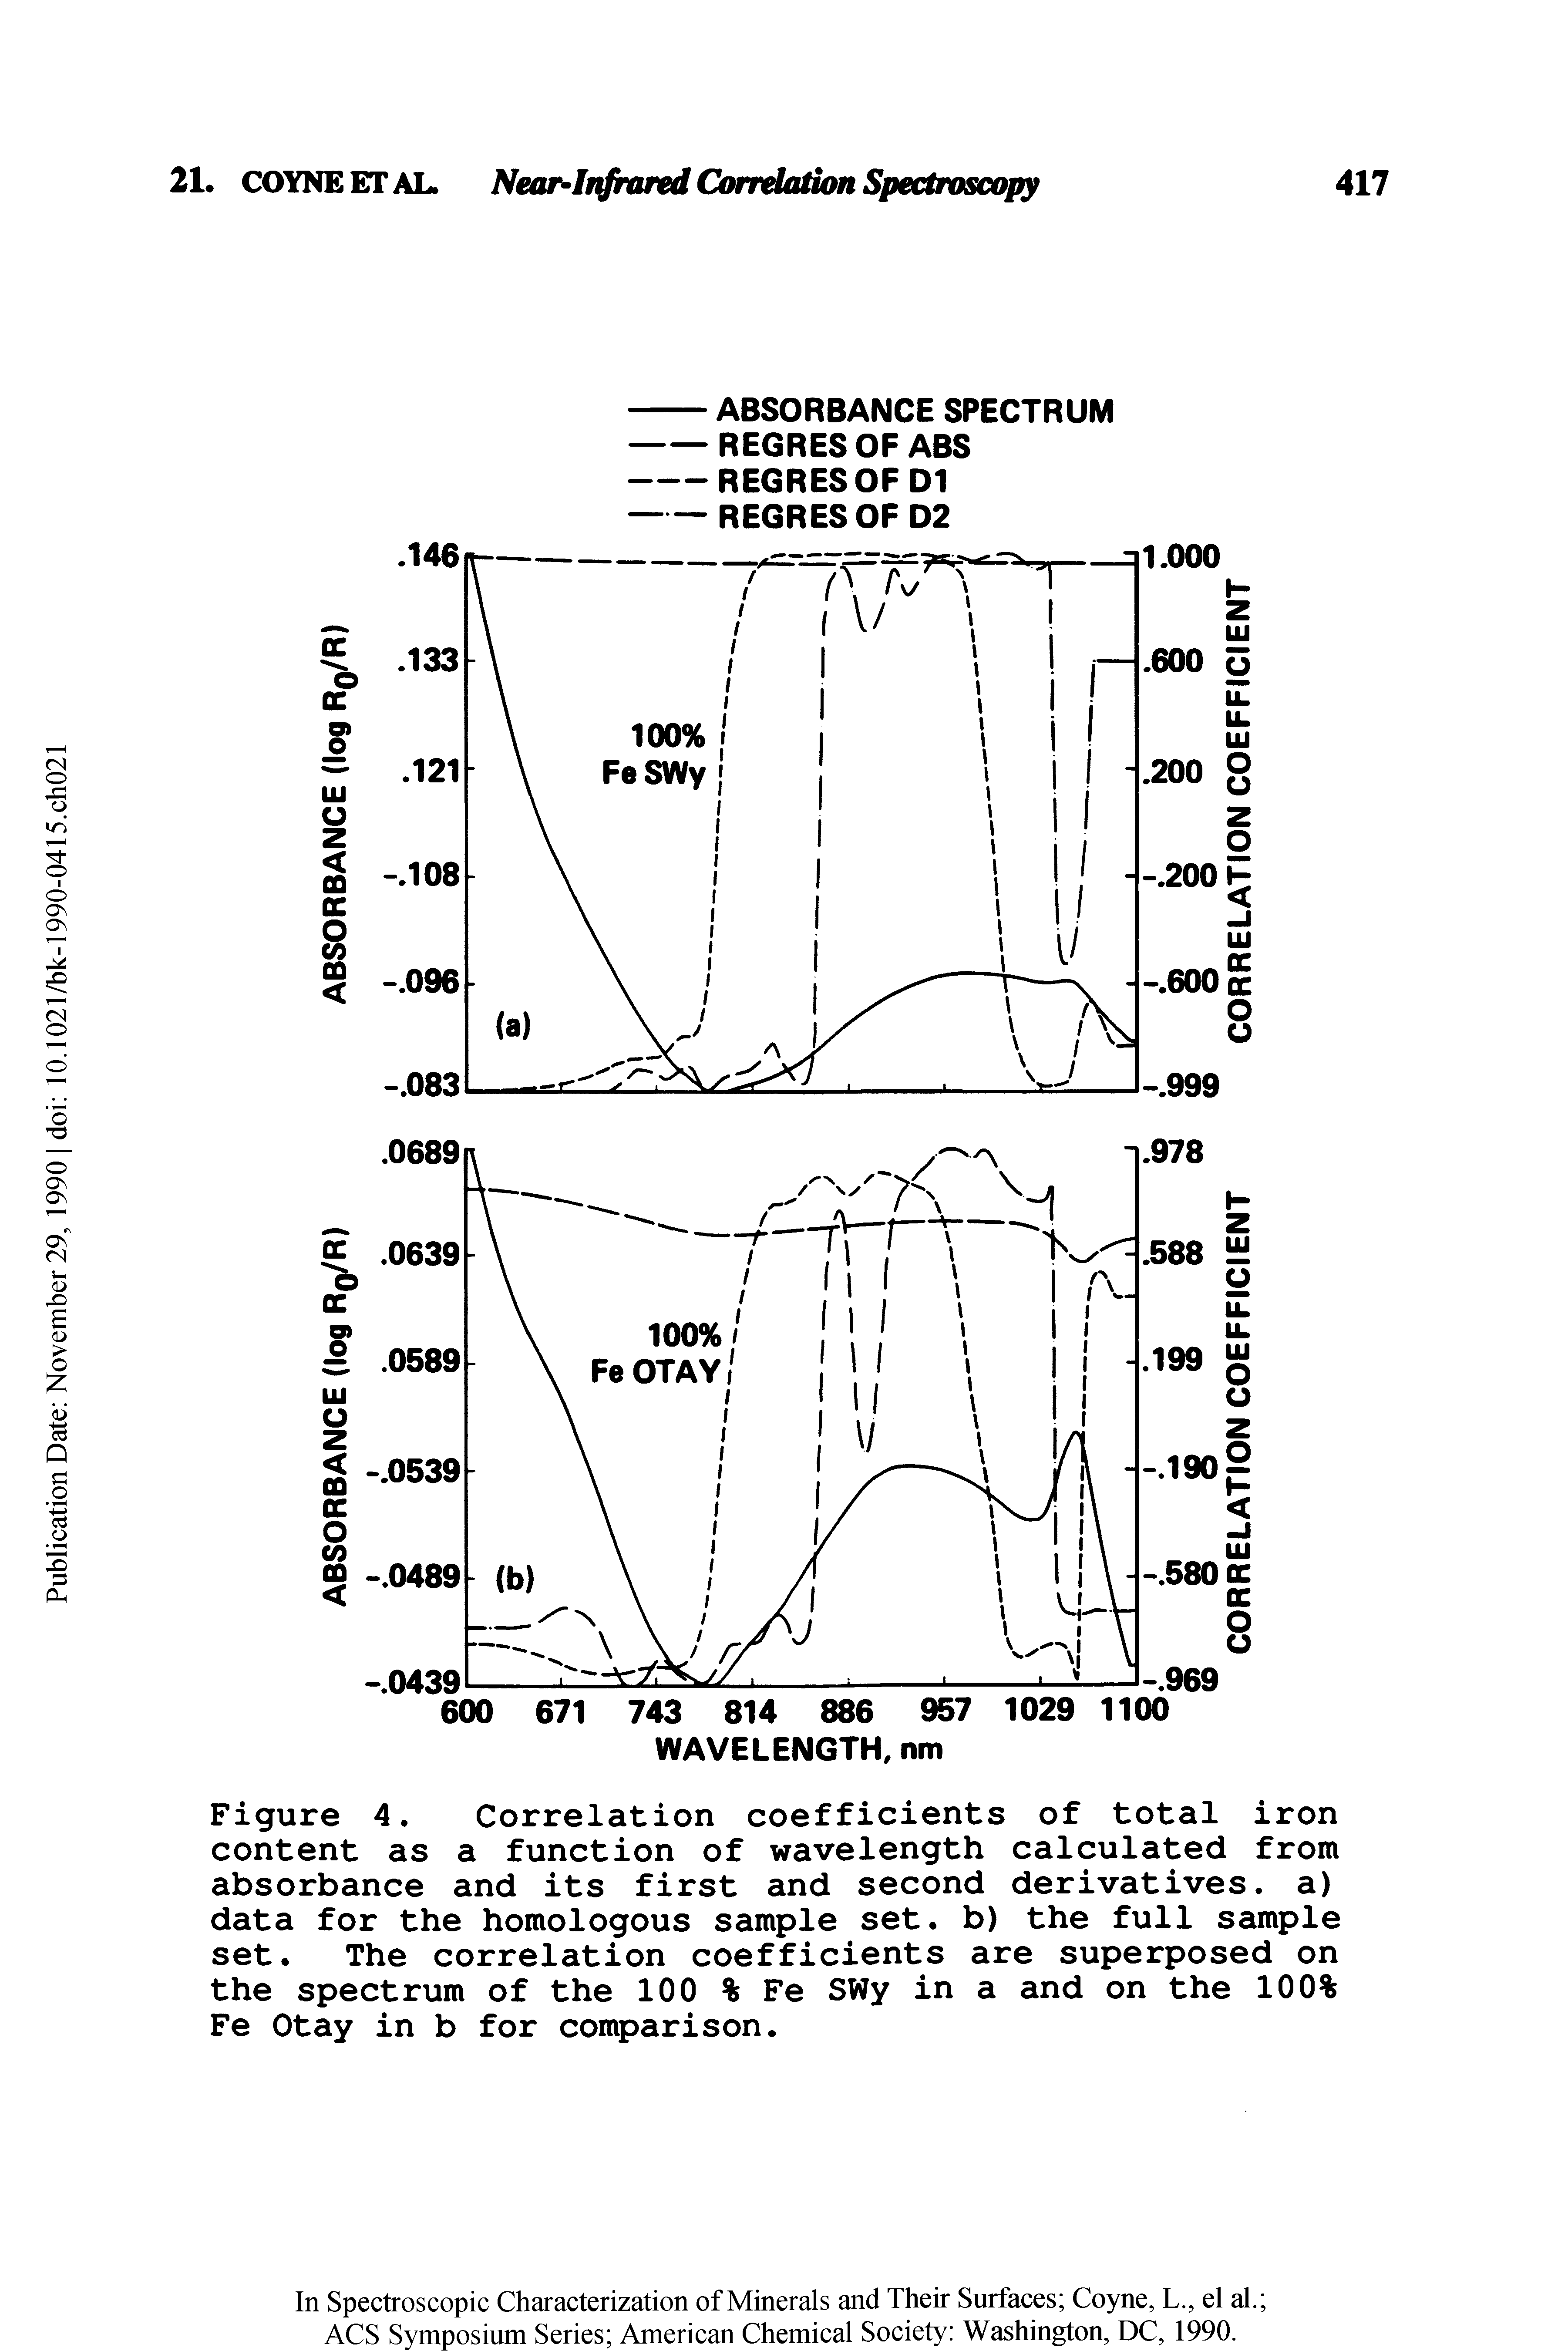 Figure 4. Correlation coefficients of total iron content as a function of wavelength calculated from absorbance and its first and second derivatives, a) data for the homologous sample set. b) the full sample set. The correlation coefficients are superposed on the spectrum of the 100 % Fe SWy in a and on the 100% Fe Otay in b for comparison.